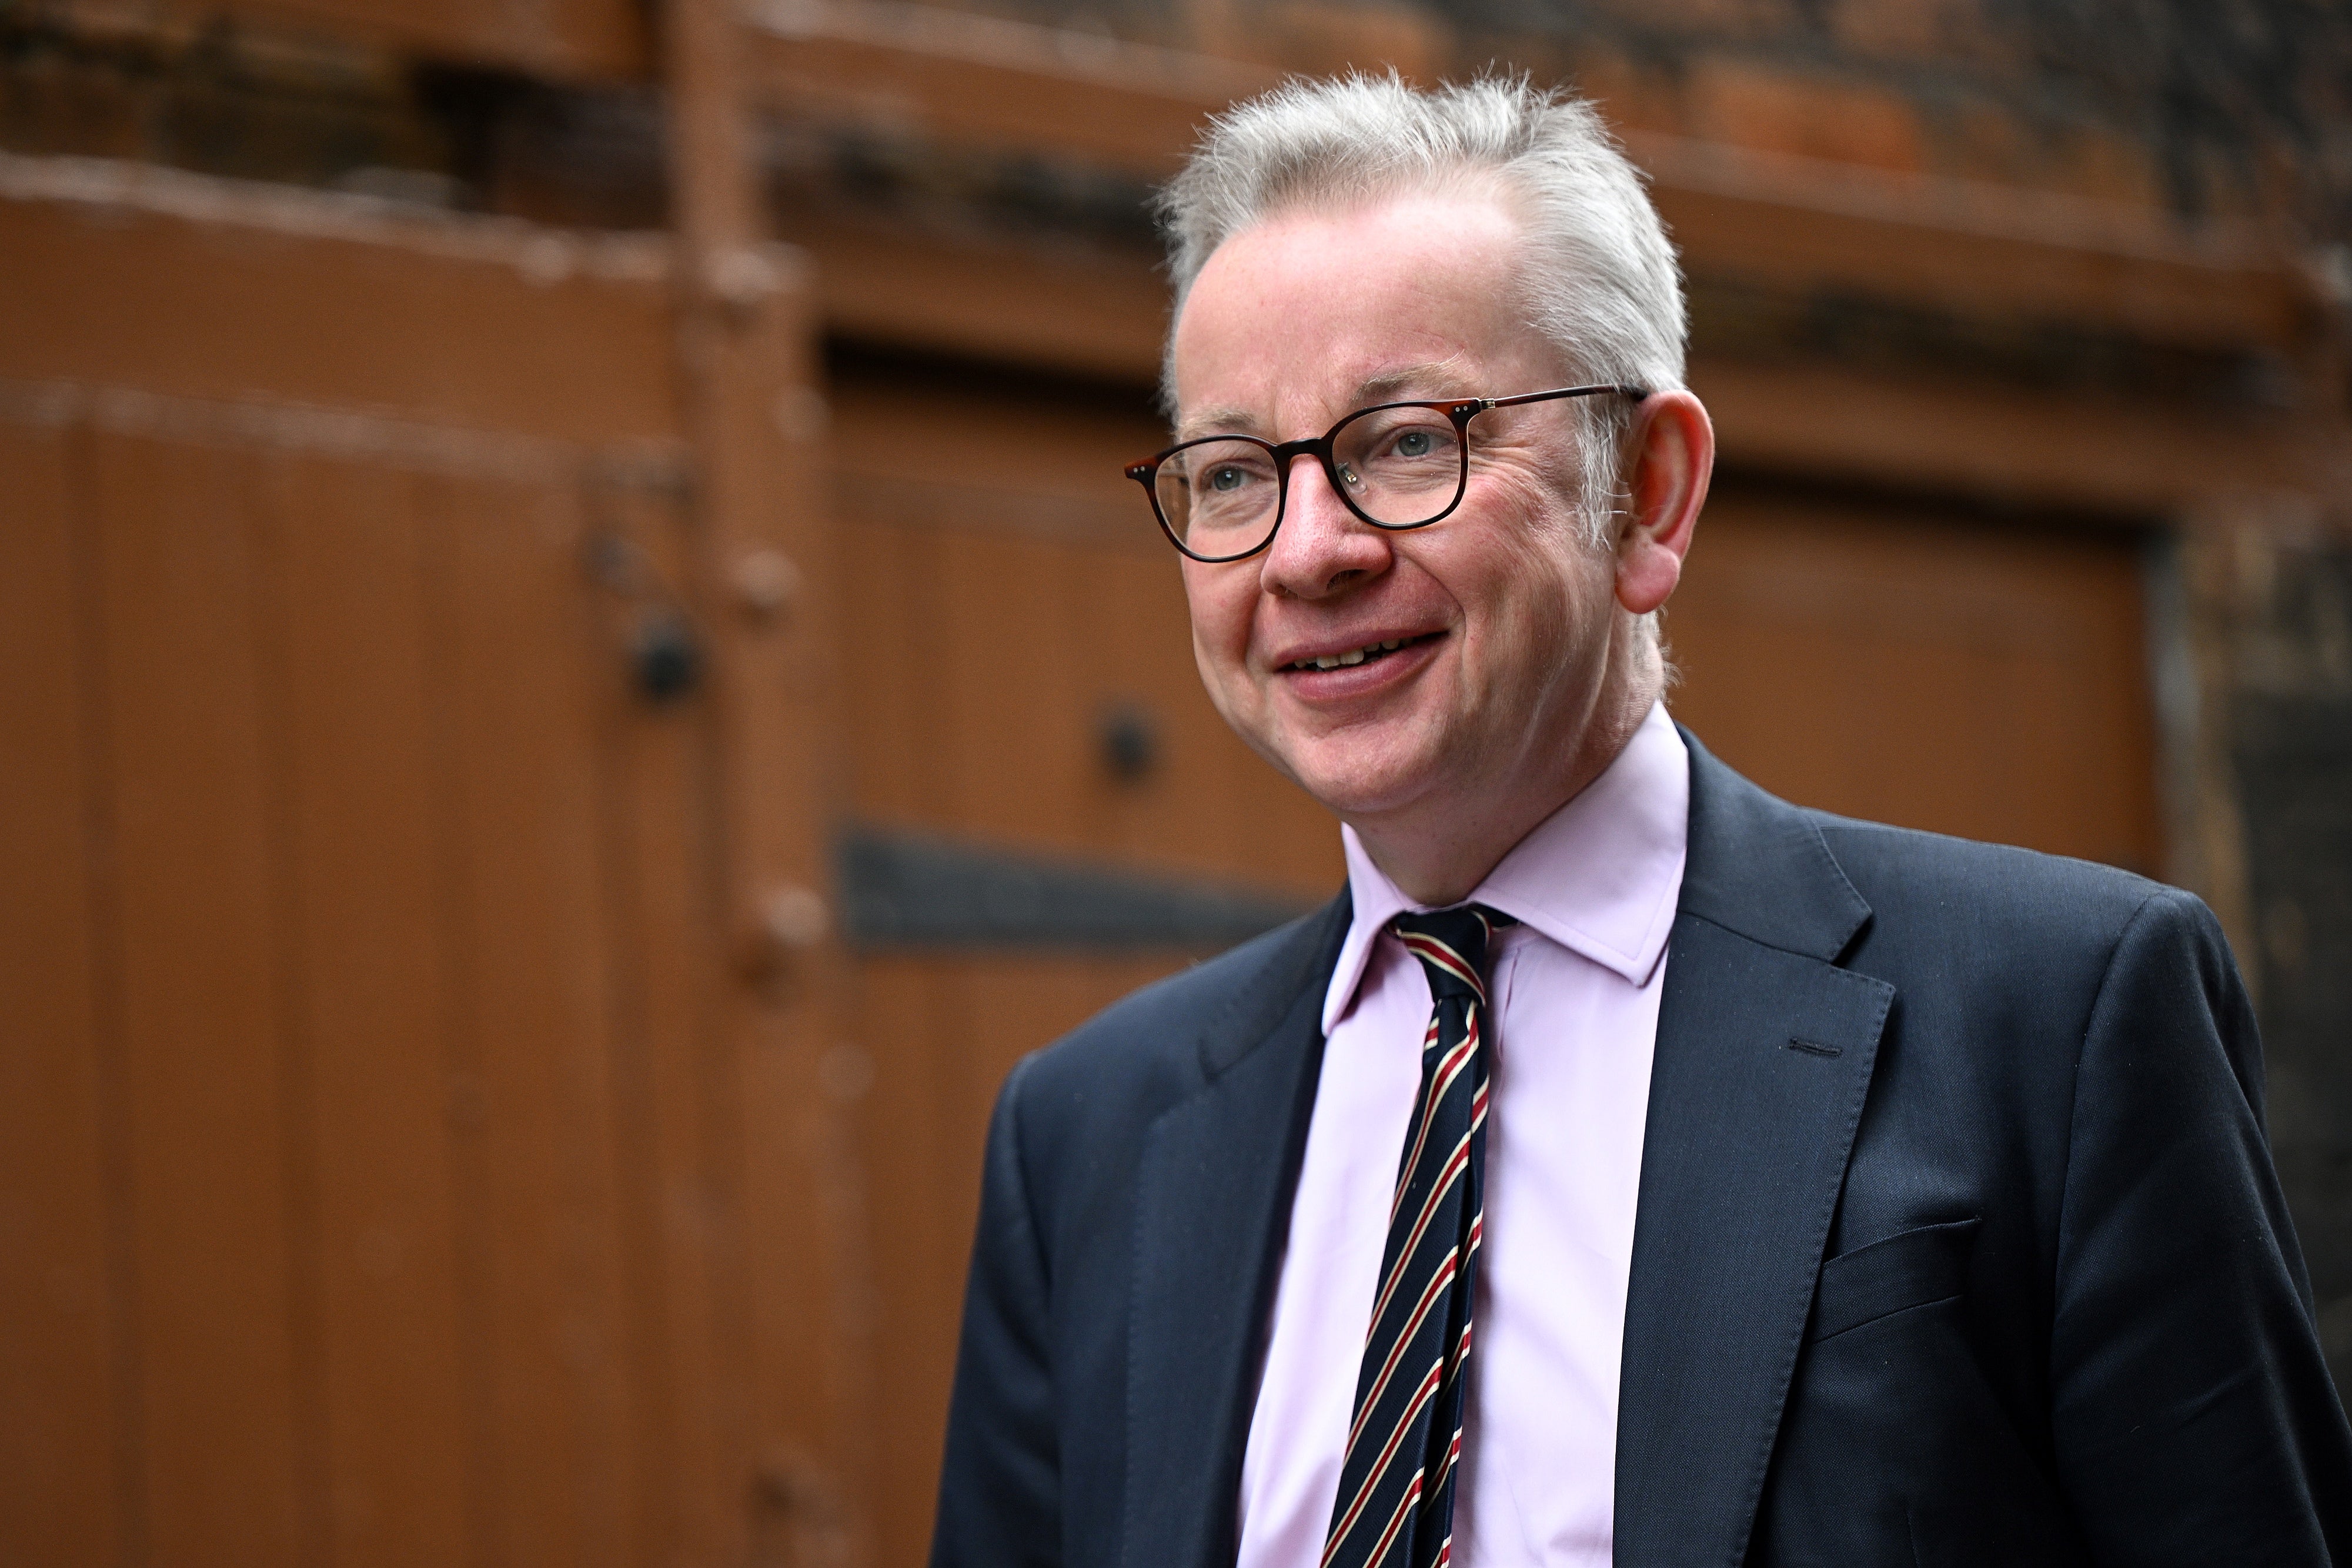 Michael Gove is pushing ambitious plans but with little money to deliver them